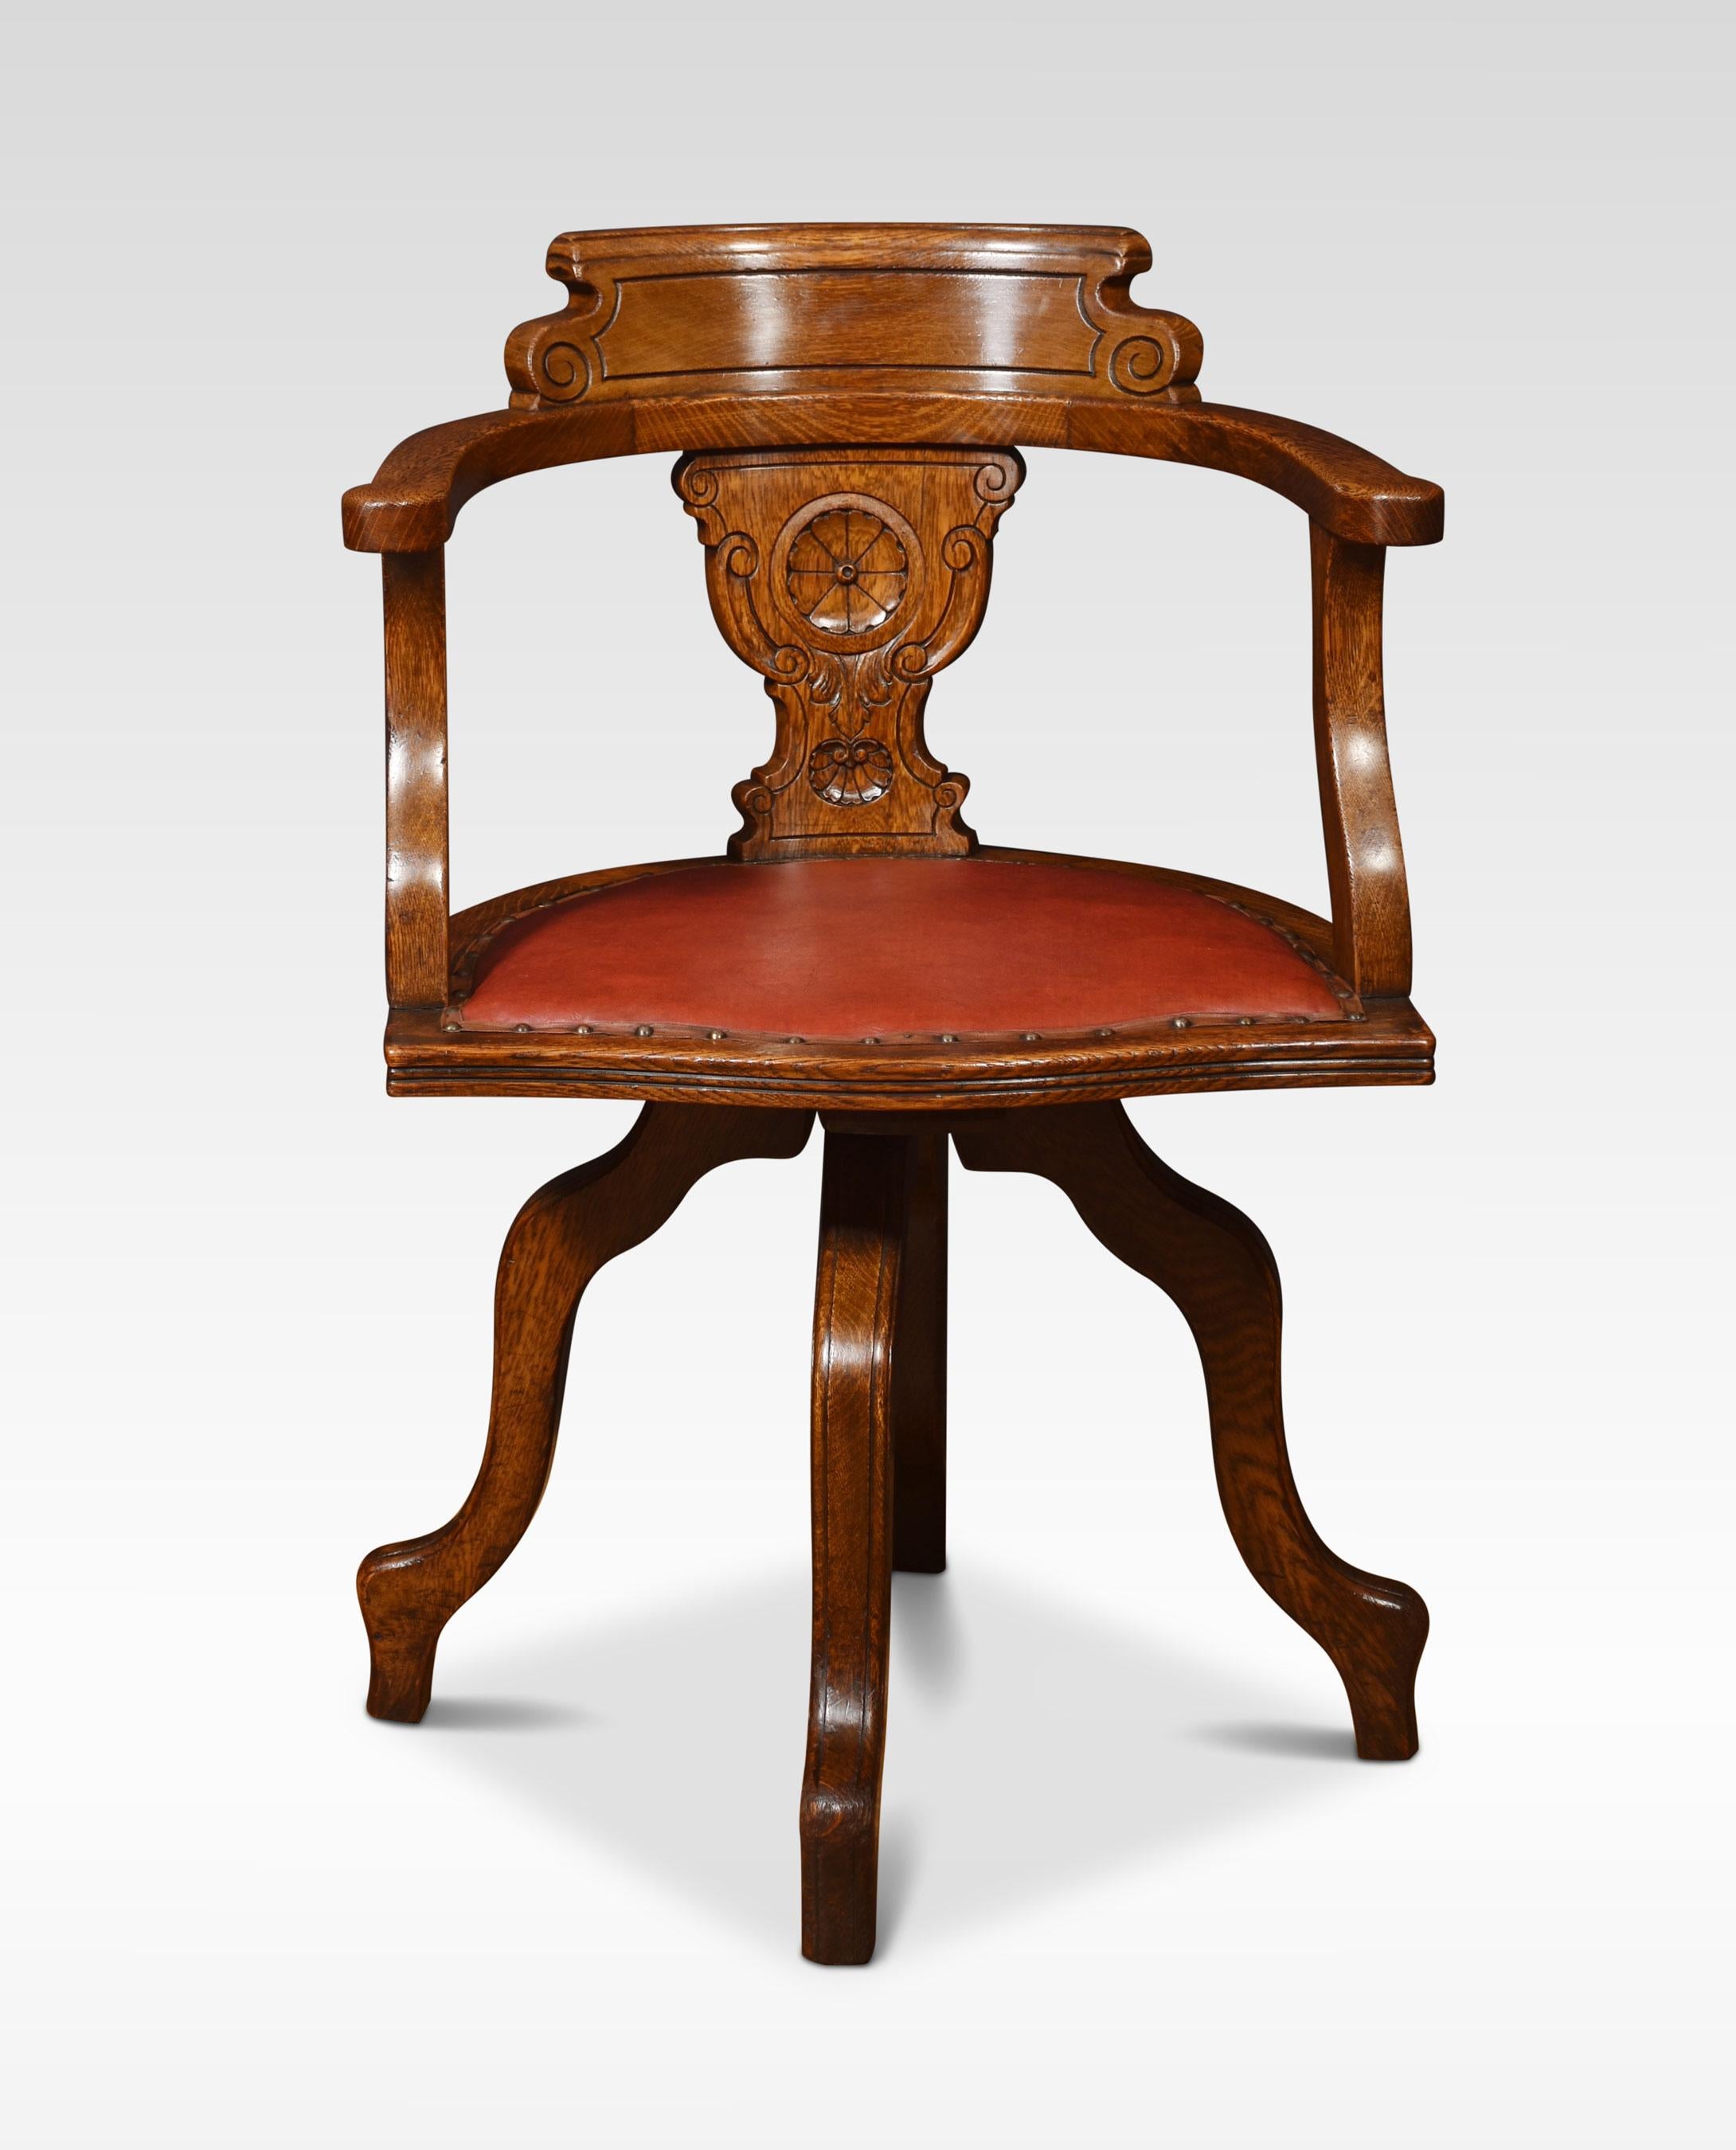 oak captain chairs with arms